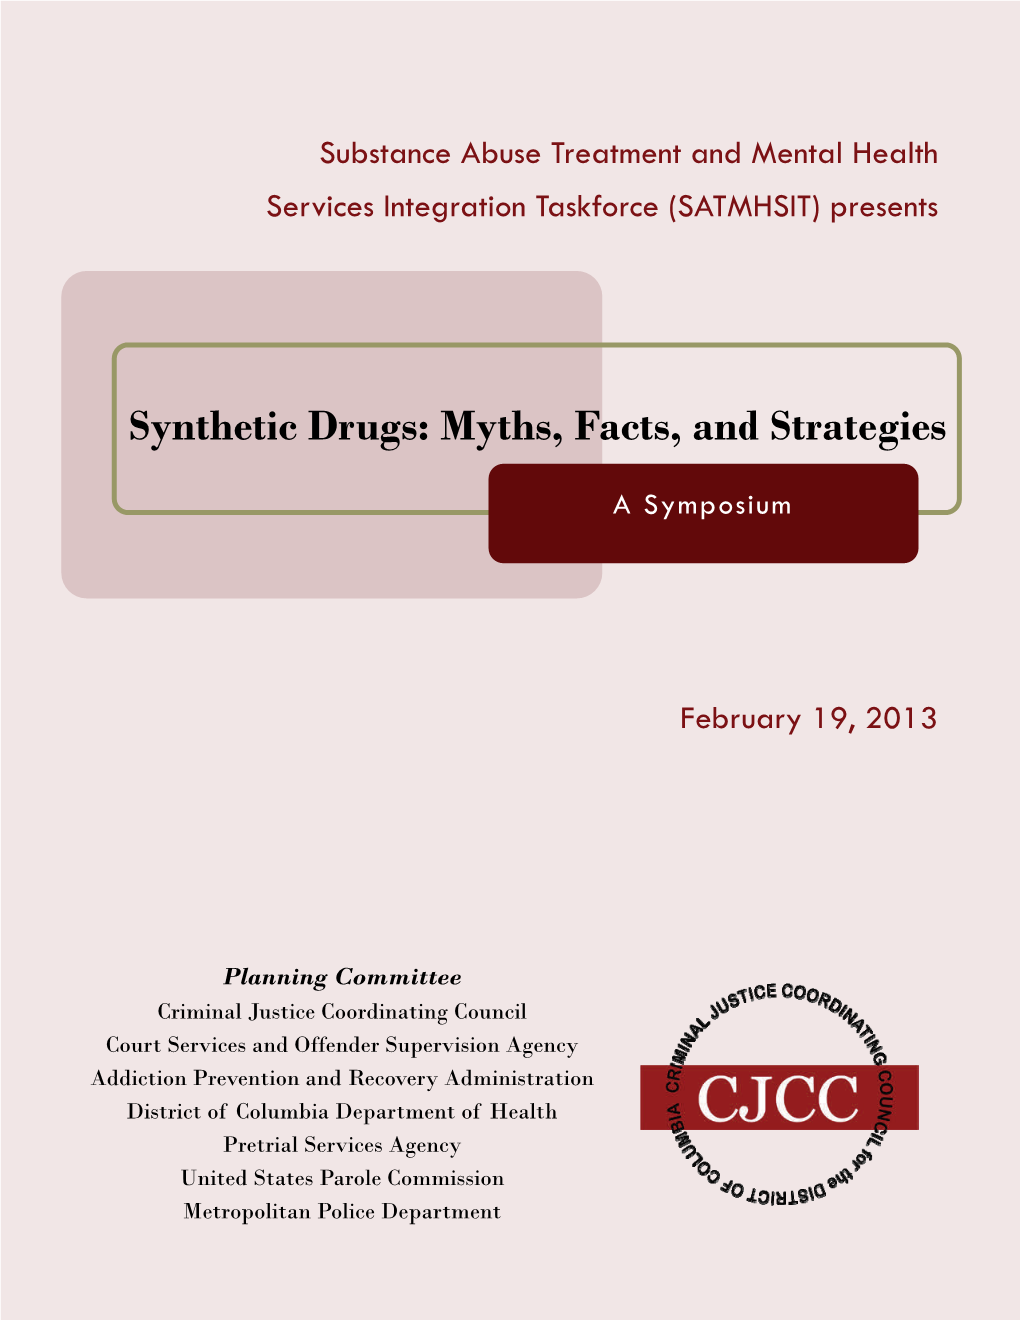 Synthetic Drugs: Myths, Facts, and Strategies